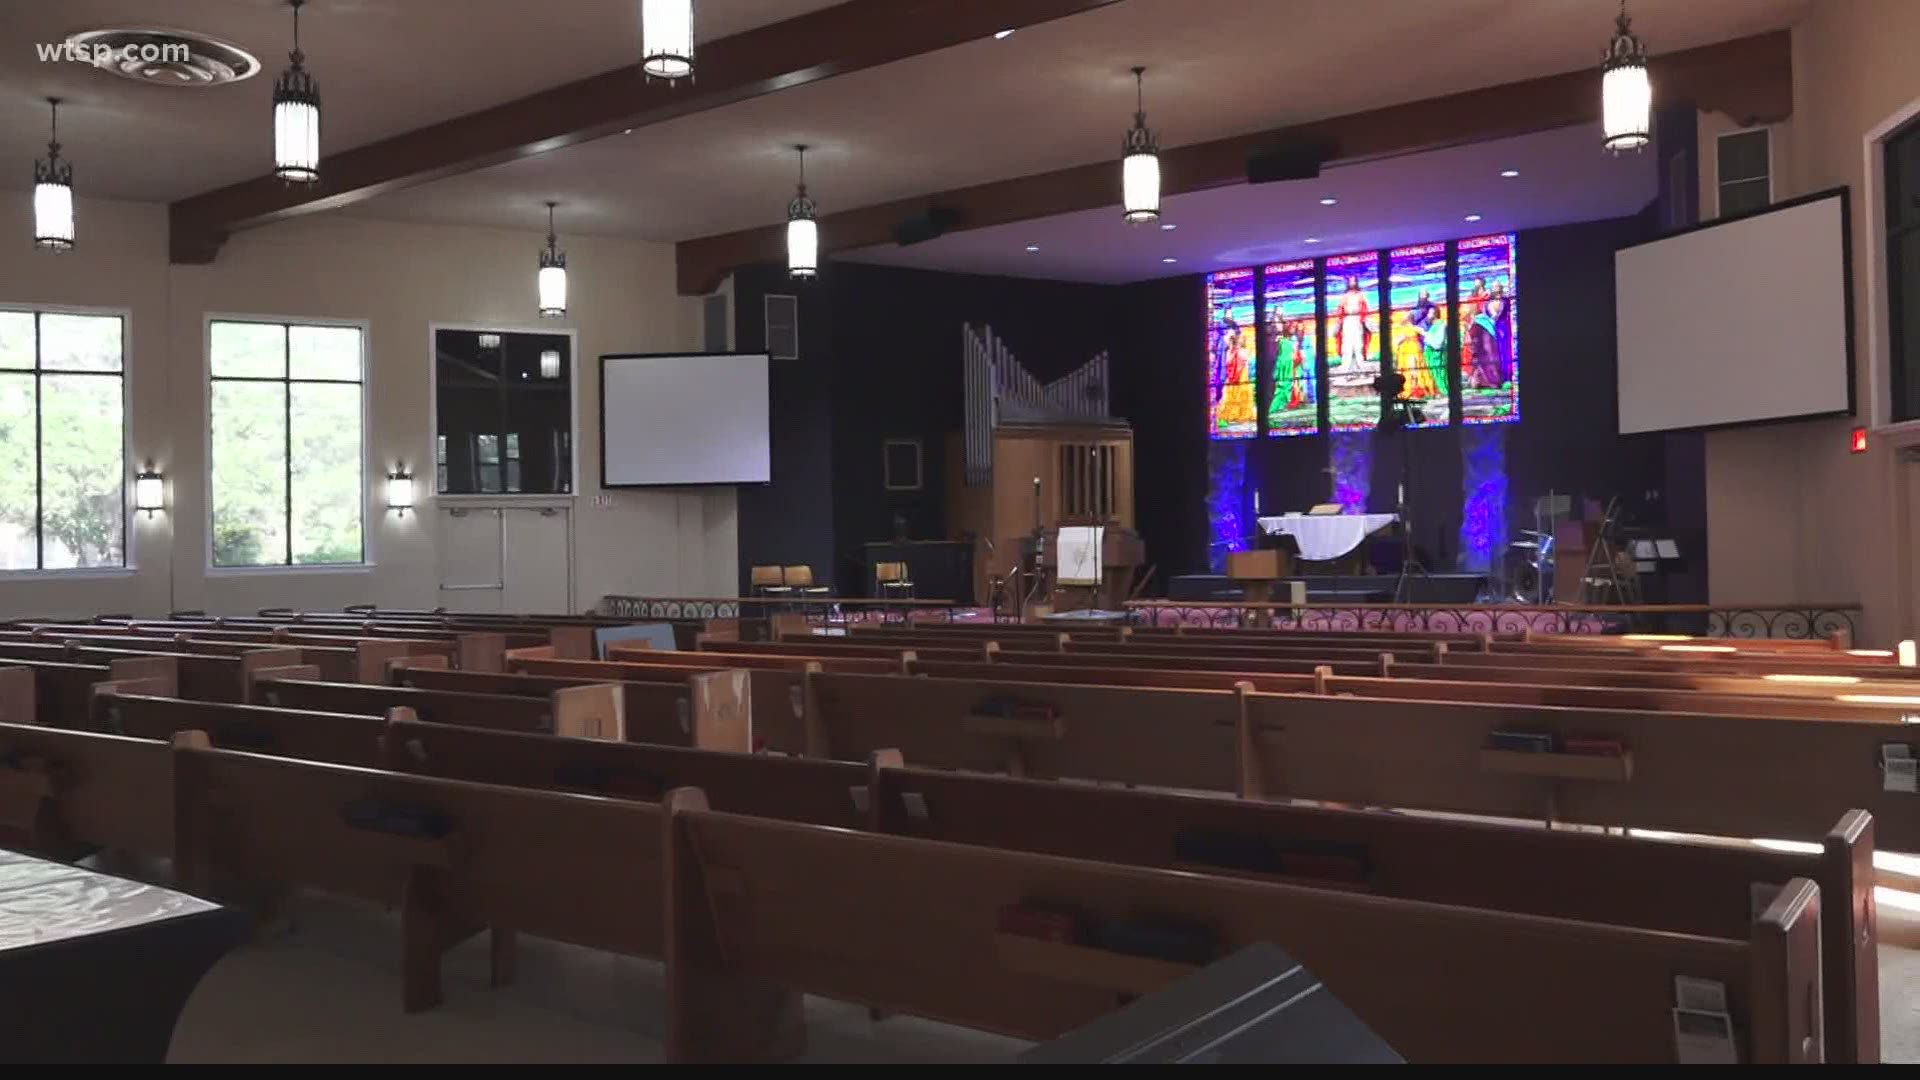 Allendale Methodist Church plans to reopen in June or July, but the pastor would like to see a steady 14-day decrease in new coronavirus case numbers first.